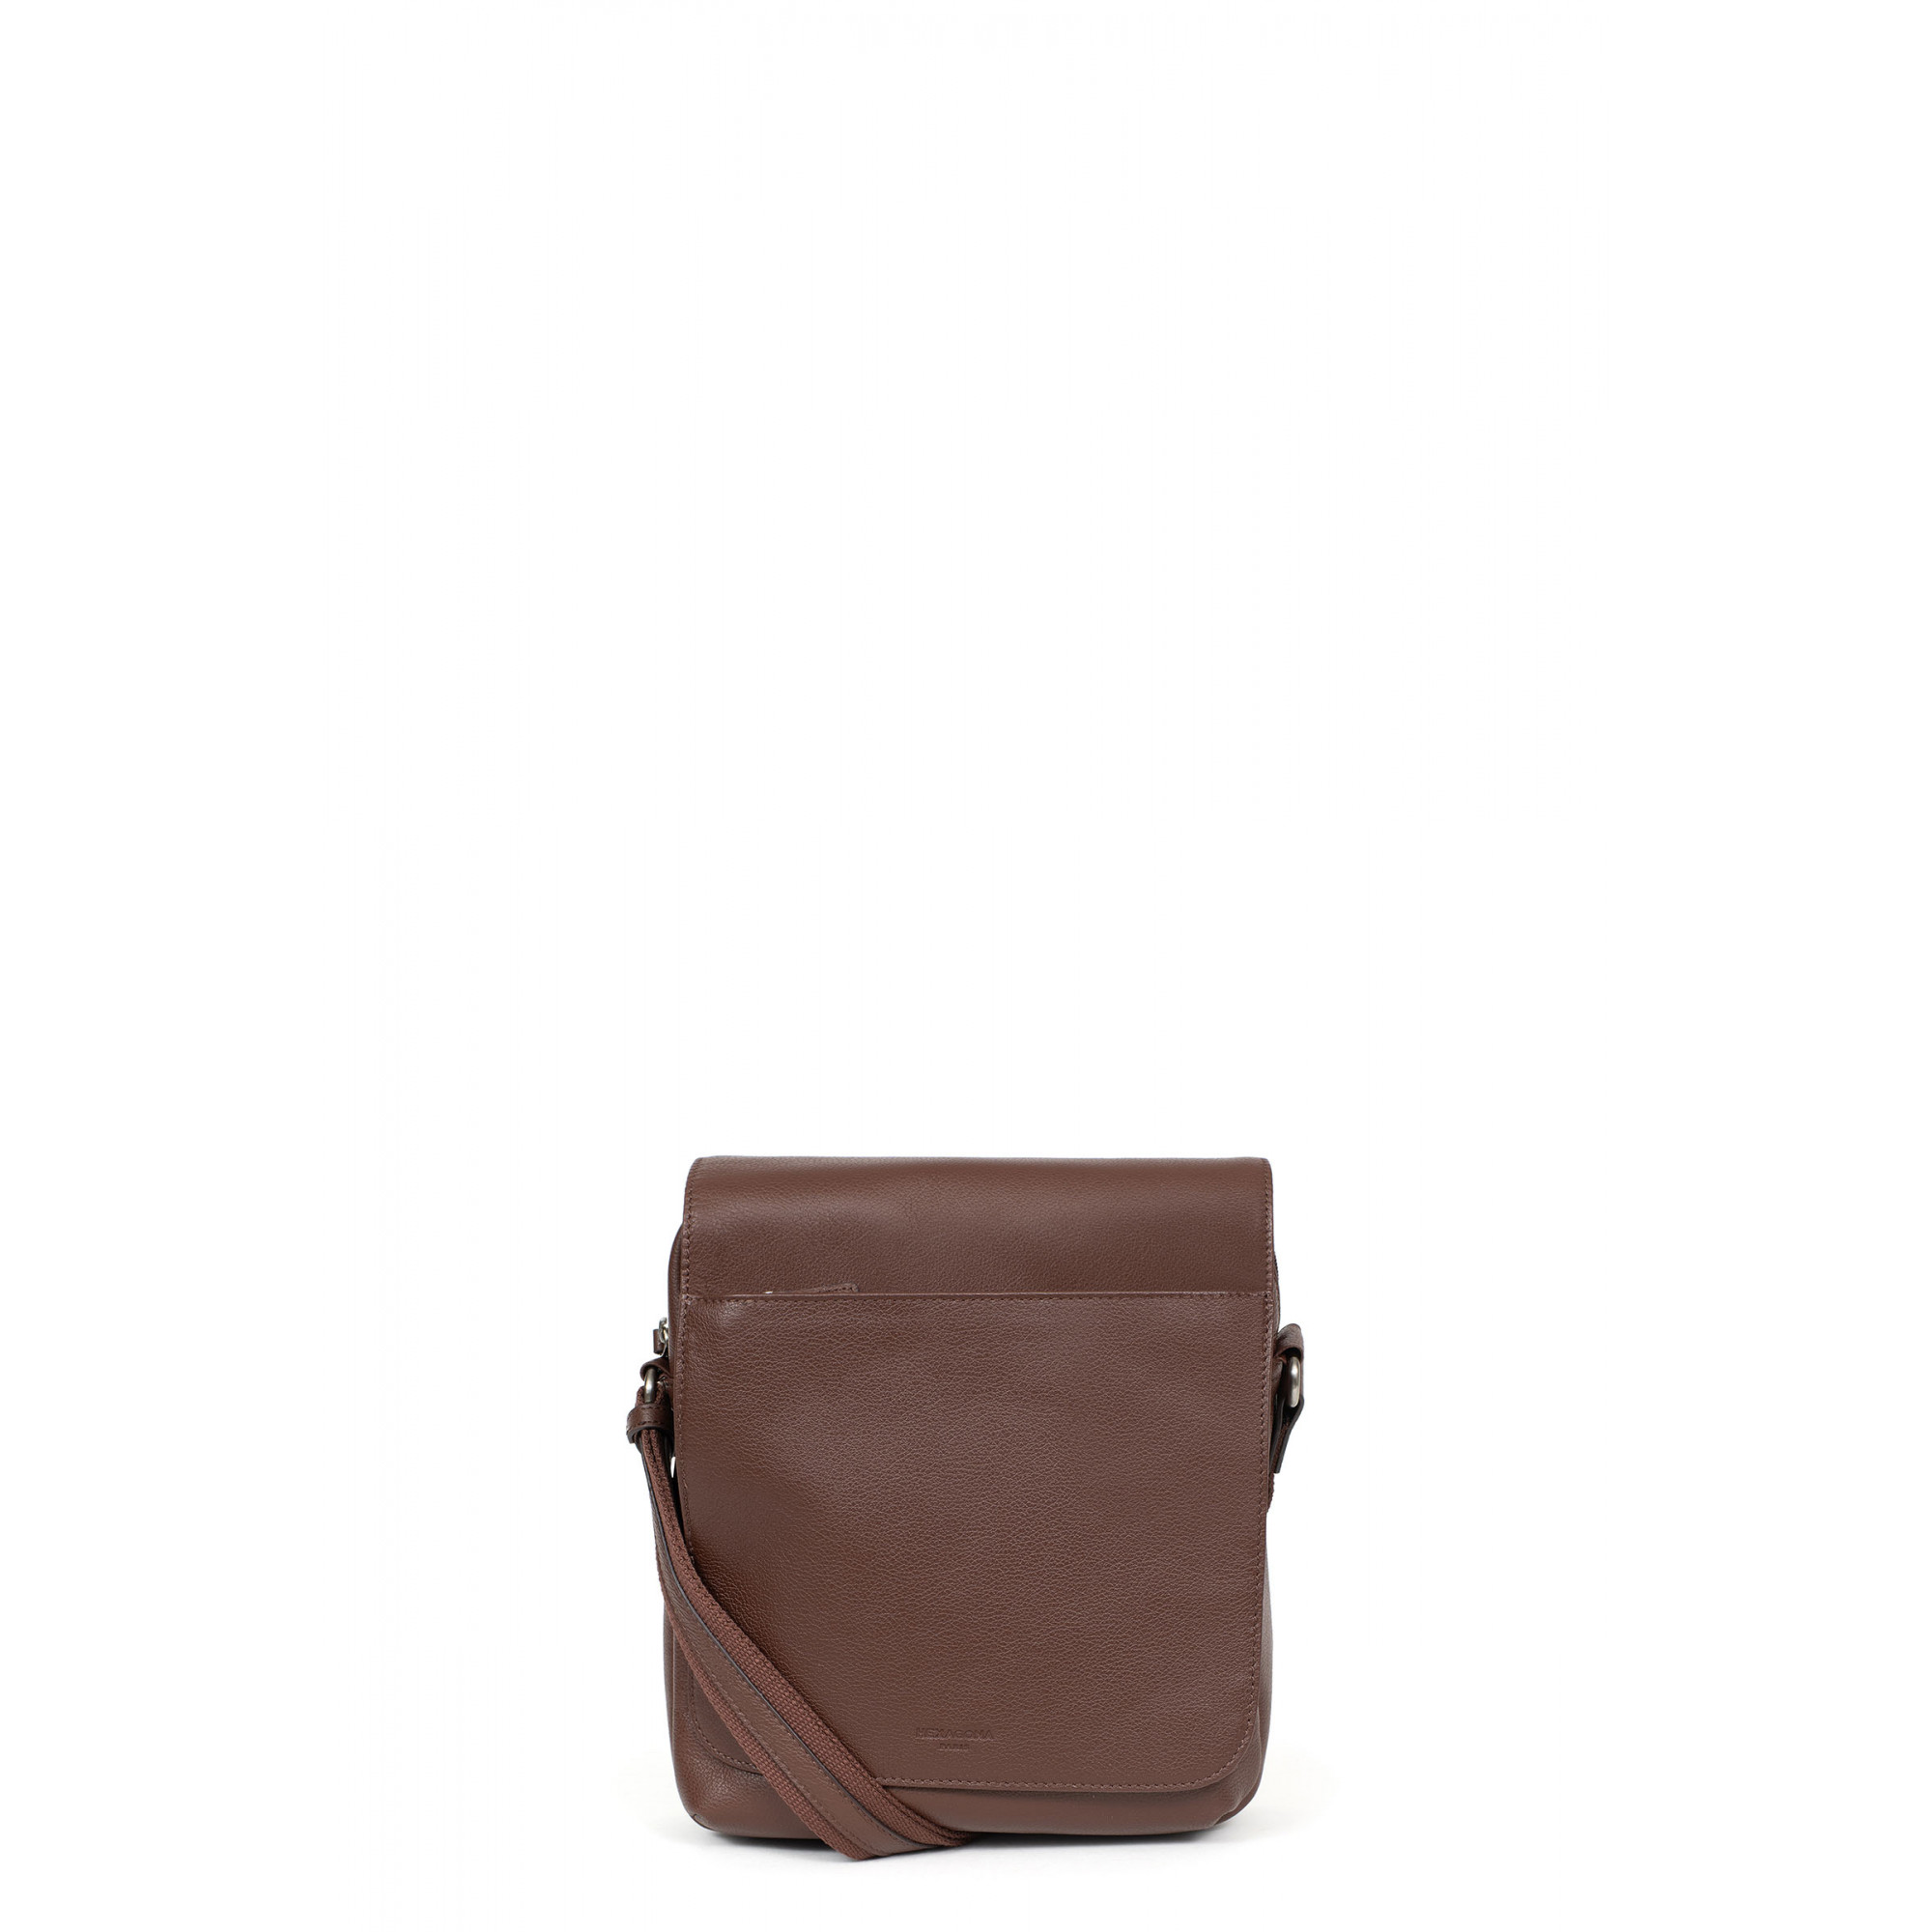 leather-small-messenger-bag-with-tablet-compartment-466183 (2)